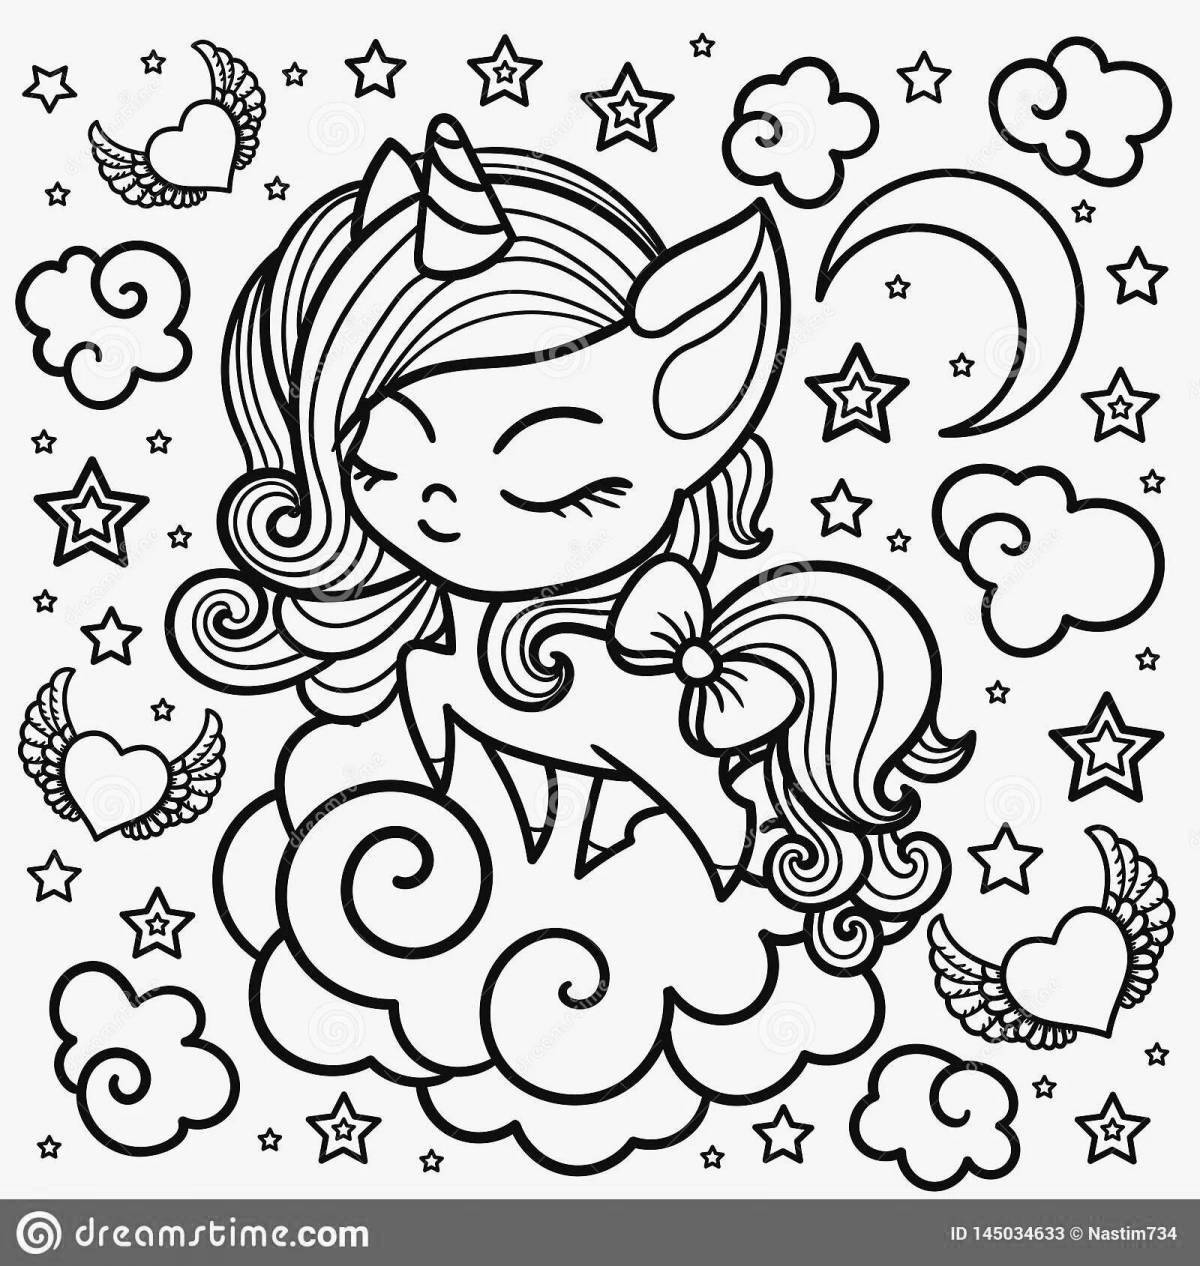 Playful unicorn cat coloring book for girls